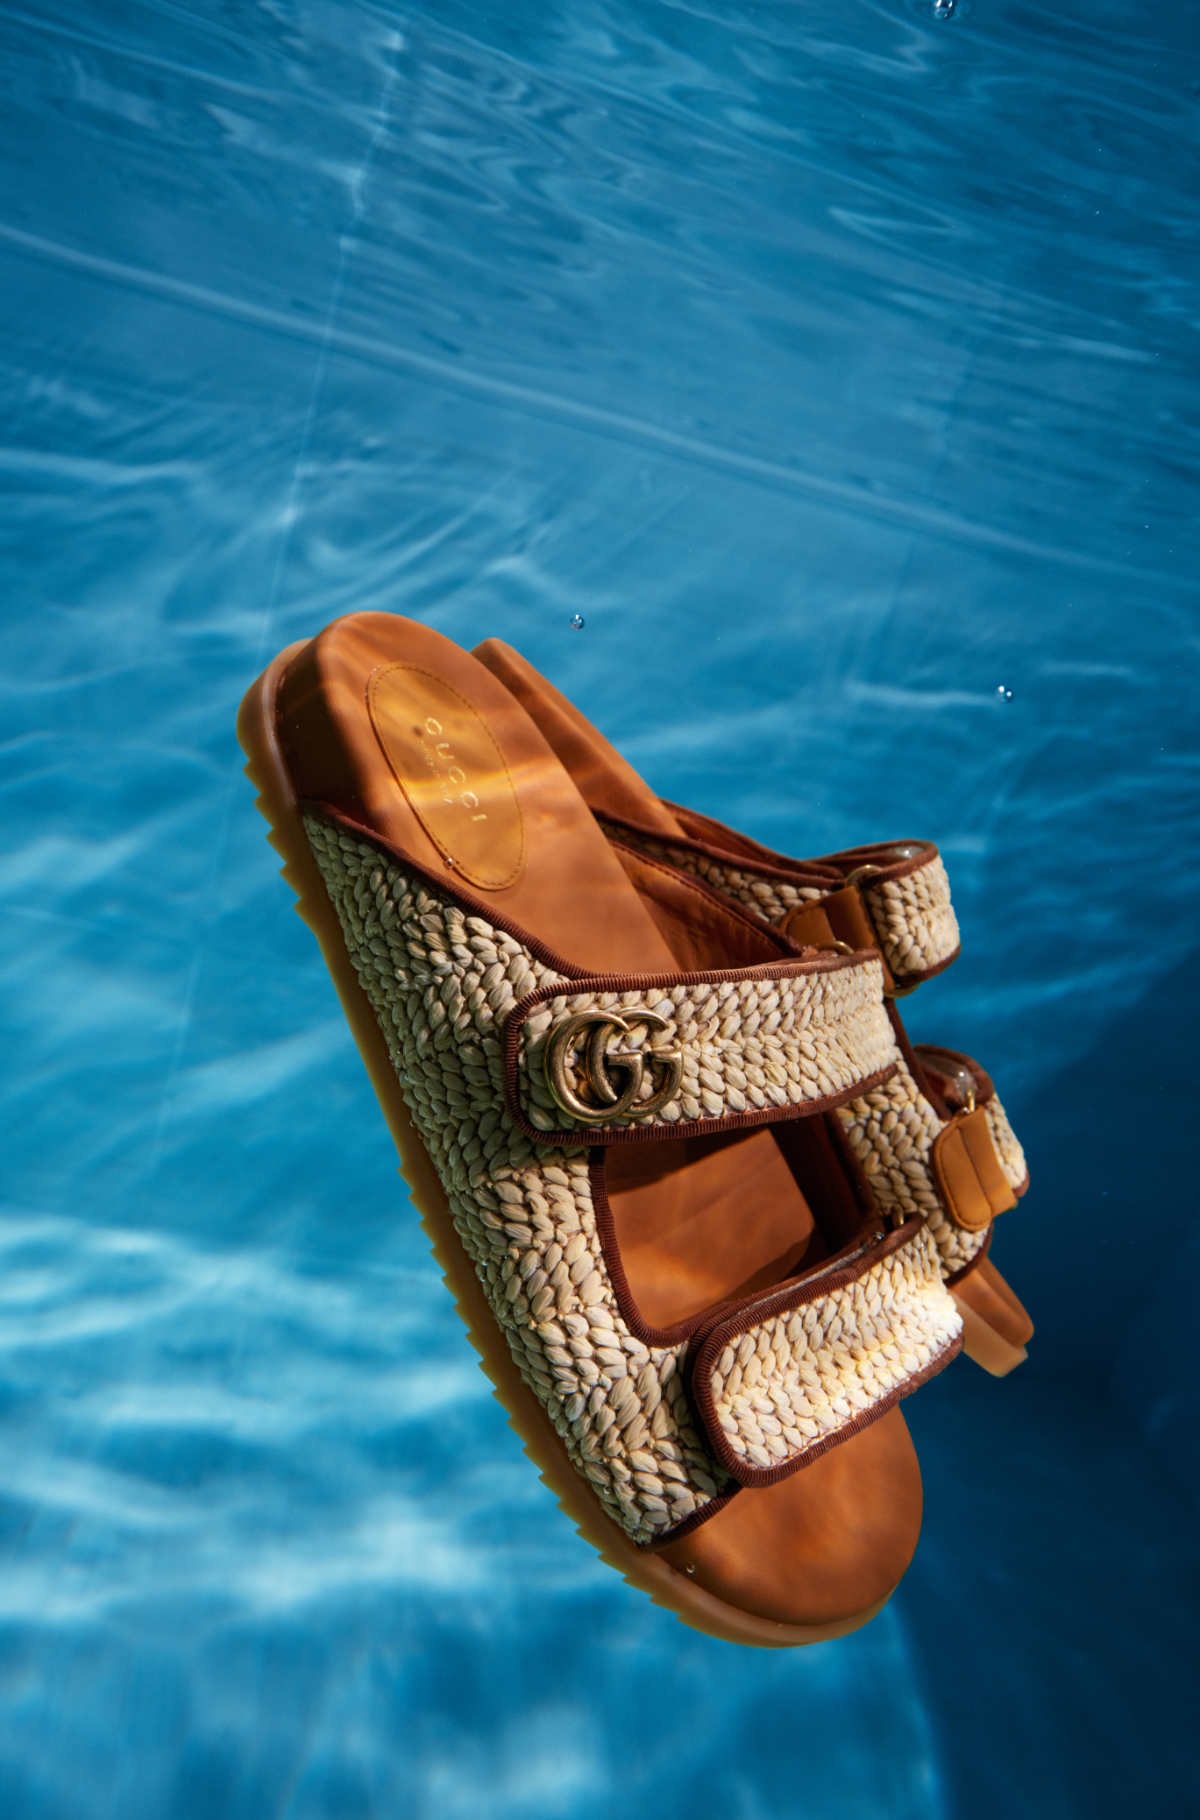 Presenting Gucci Lido, Encapsulating The Essence Of An Italian Summer